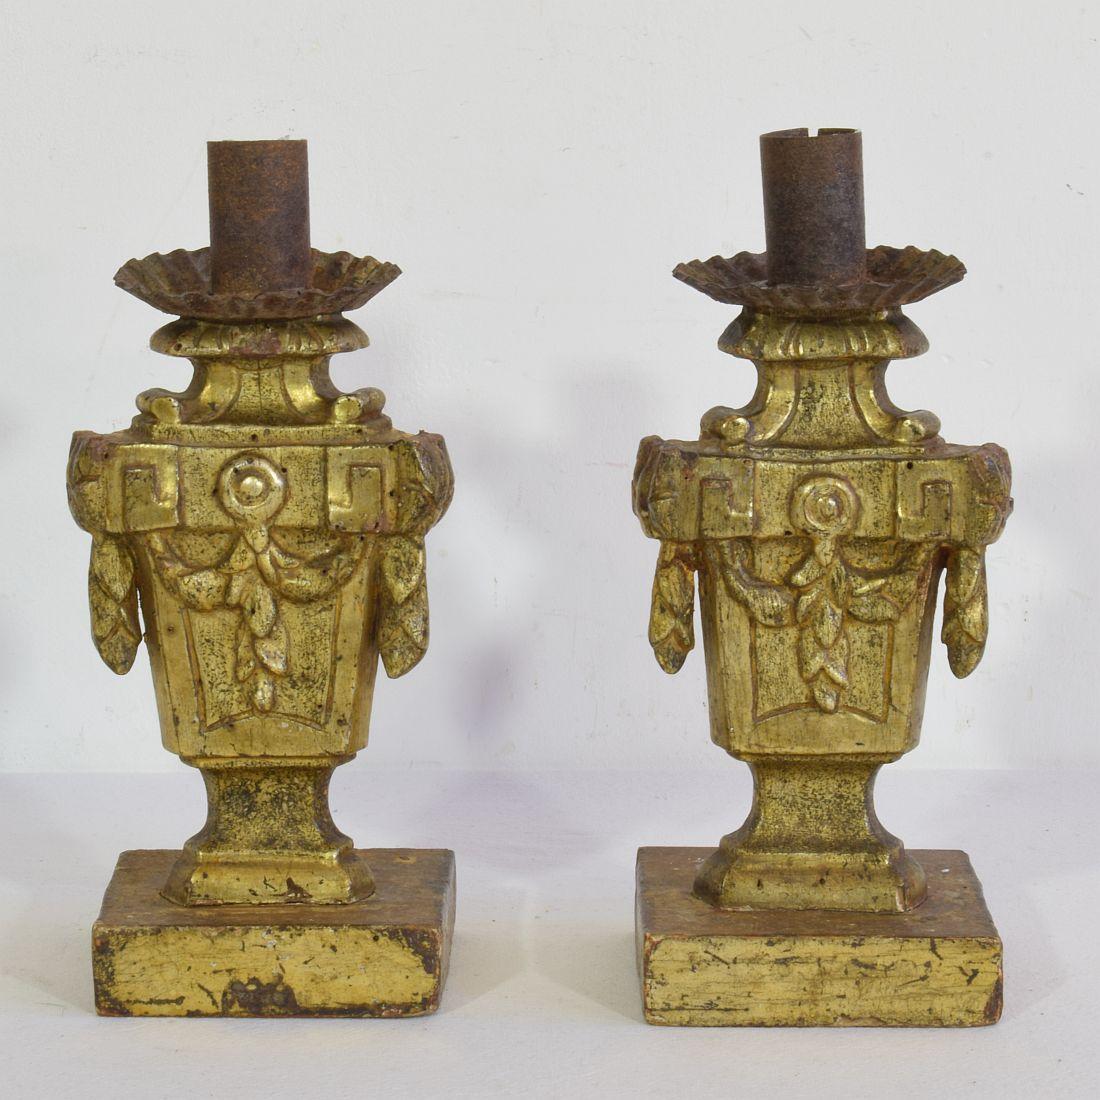 Hand-Carved Pair of Small 18th Century Italian Neoclassical Candleholders / Candlesticks For Sale